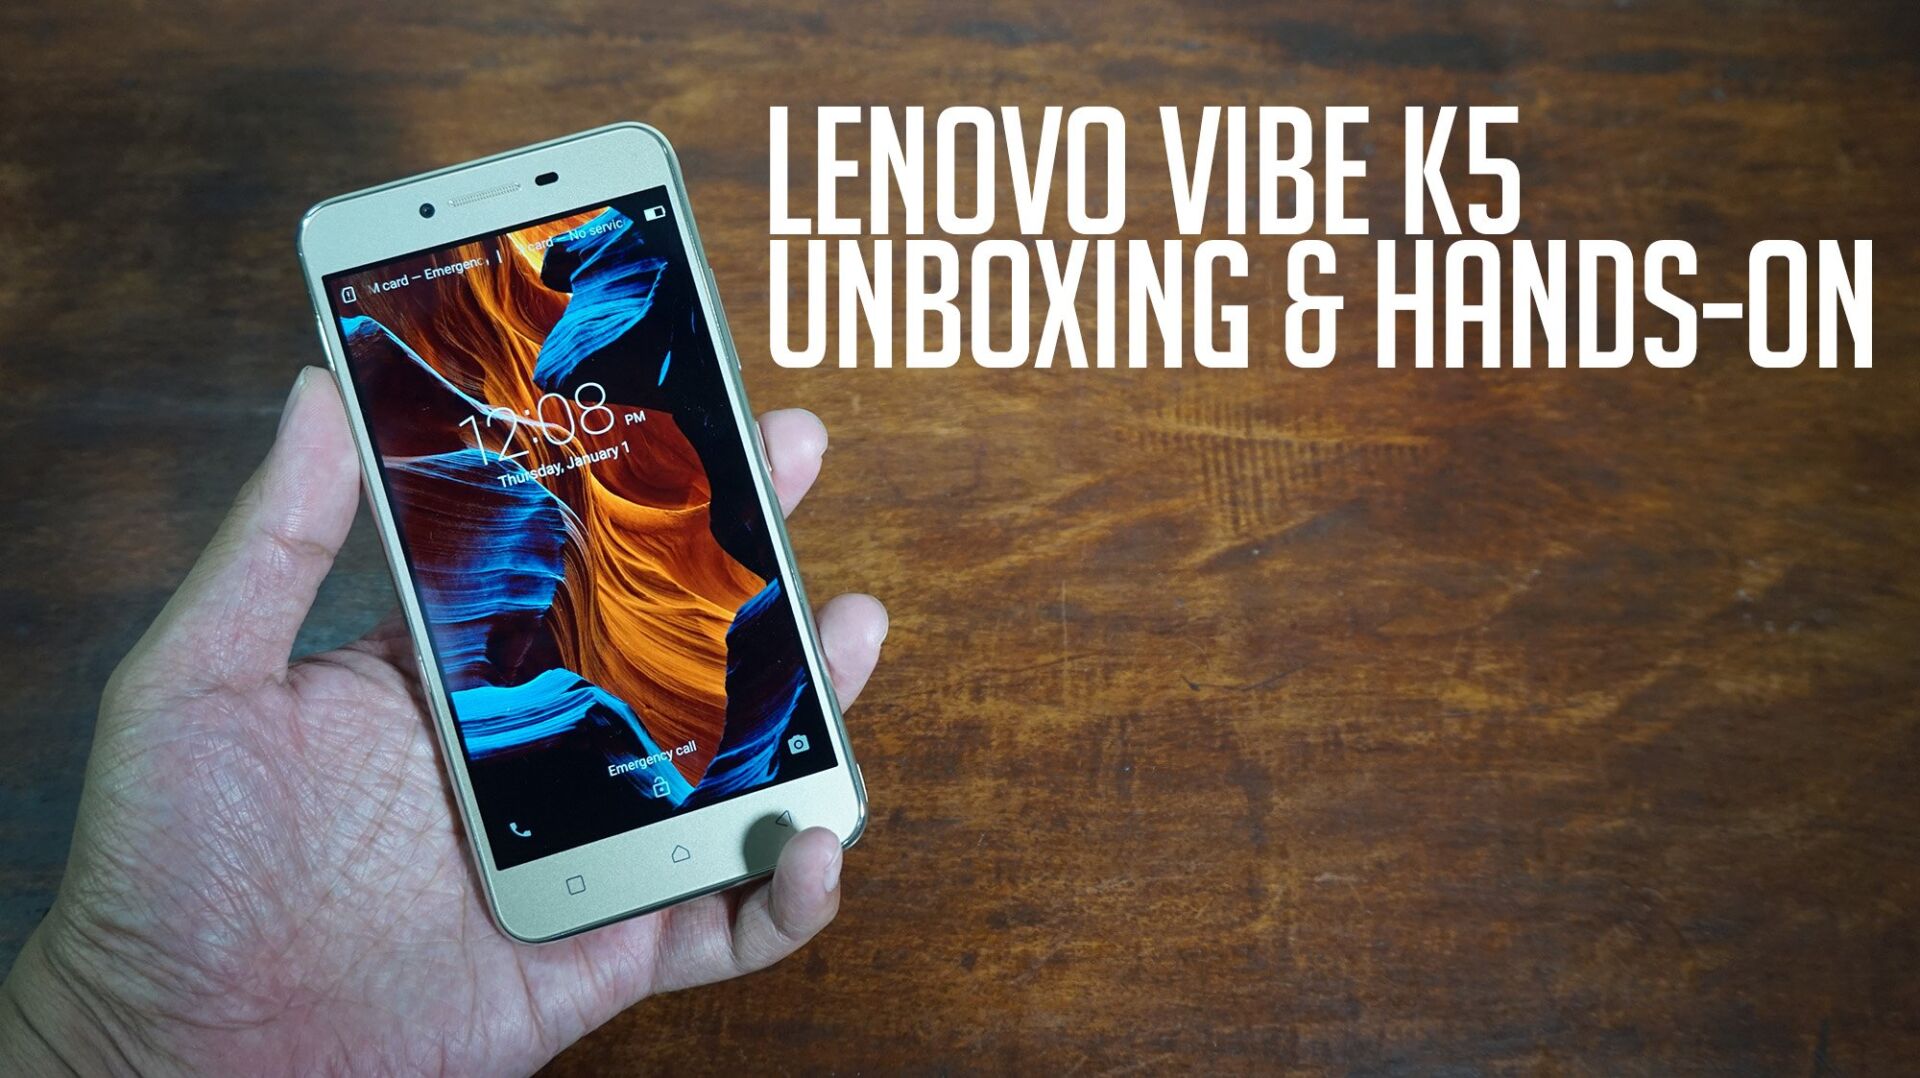 Lenovo Vibe K5 Unboxing And Hands On Jam Online Philippines Tech News Reviews